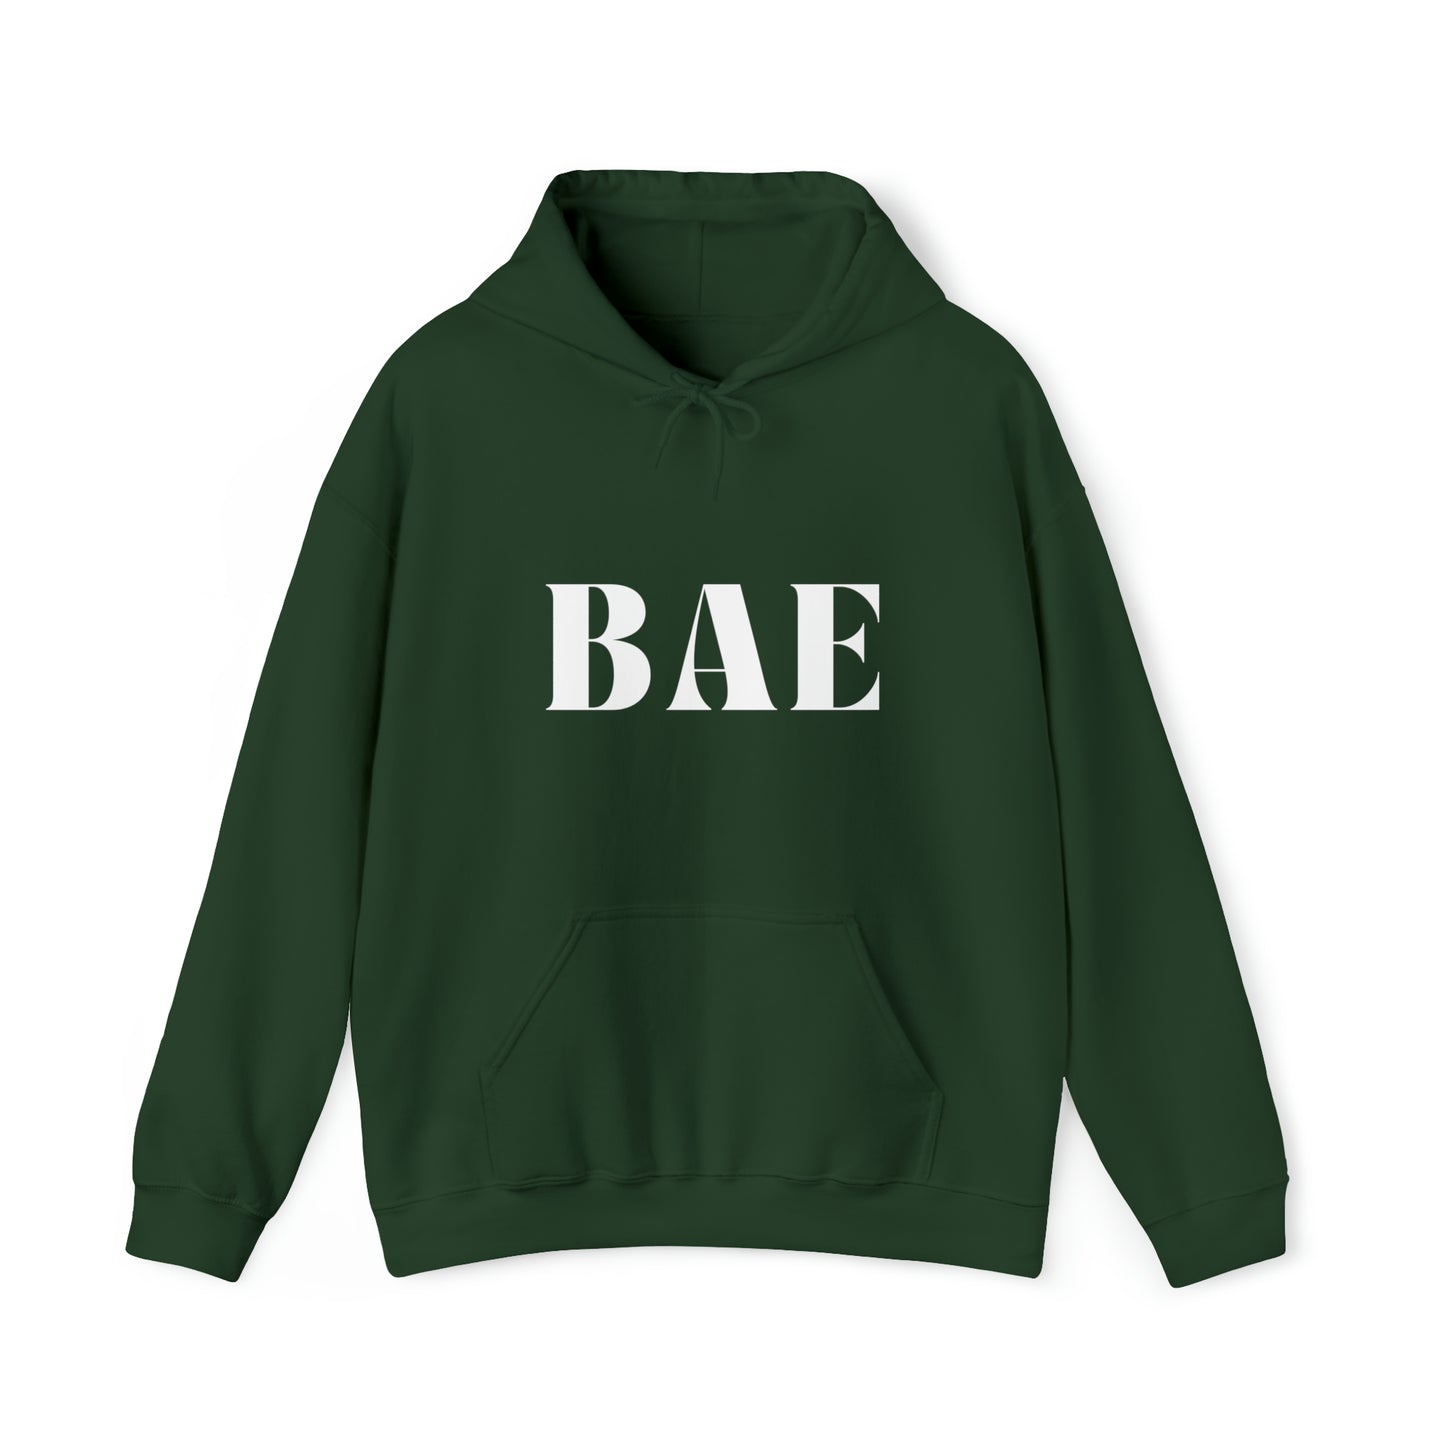 S Forest Green Bae Hoodie from HoodySZN.com